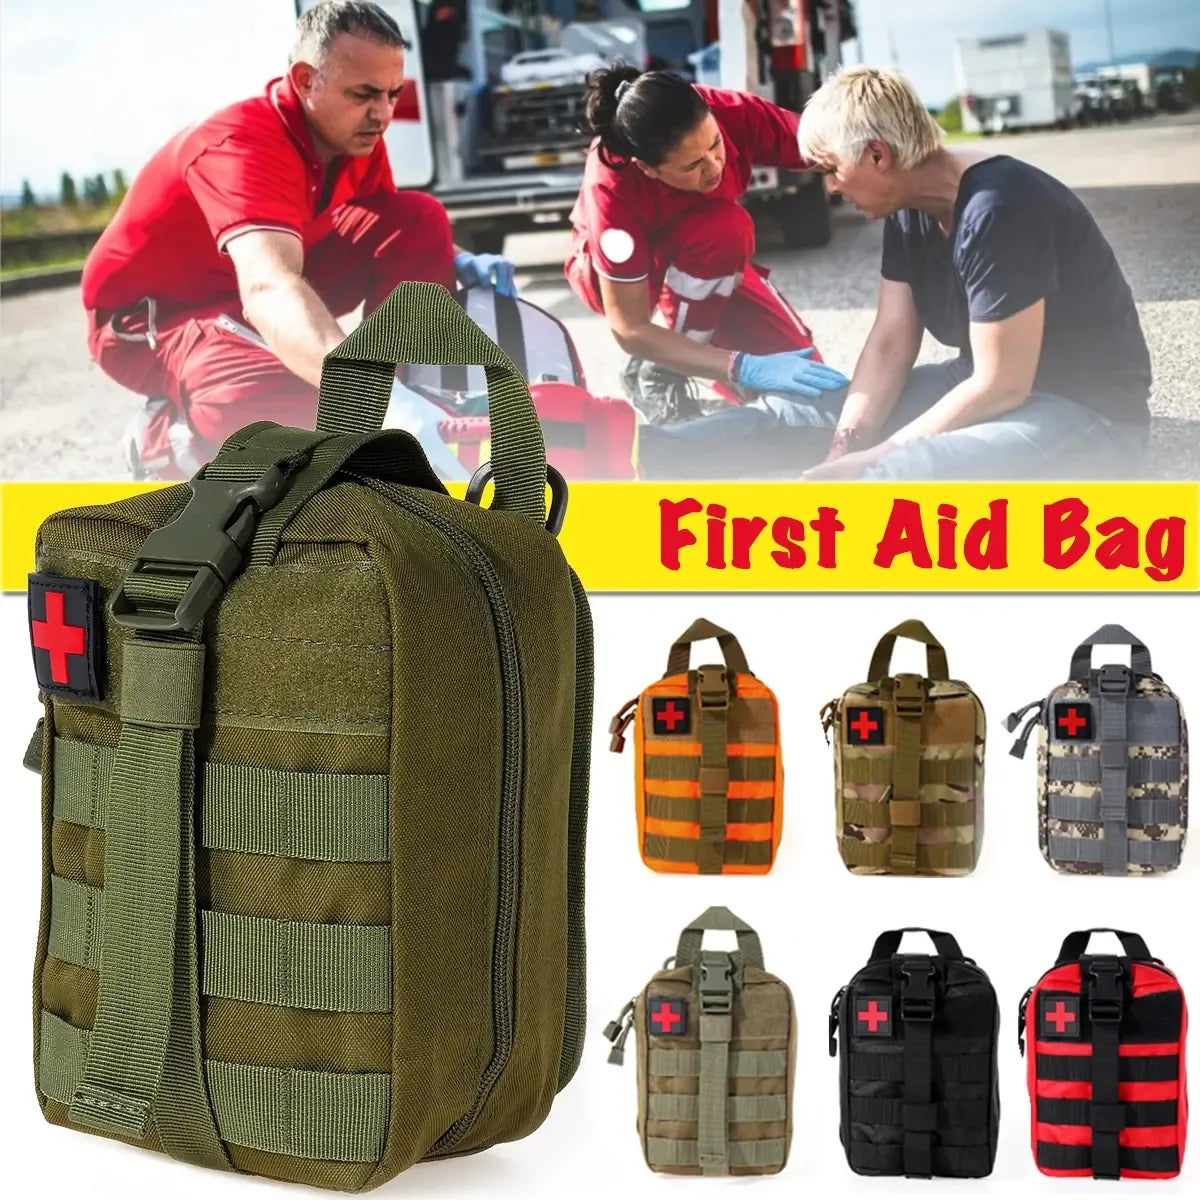 Tactical First Aid Kit Waist Bag Emergency Travel Survival Rescue Handbag Waterproof Camping First Aid Pouch Patch Bag Case